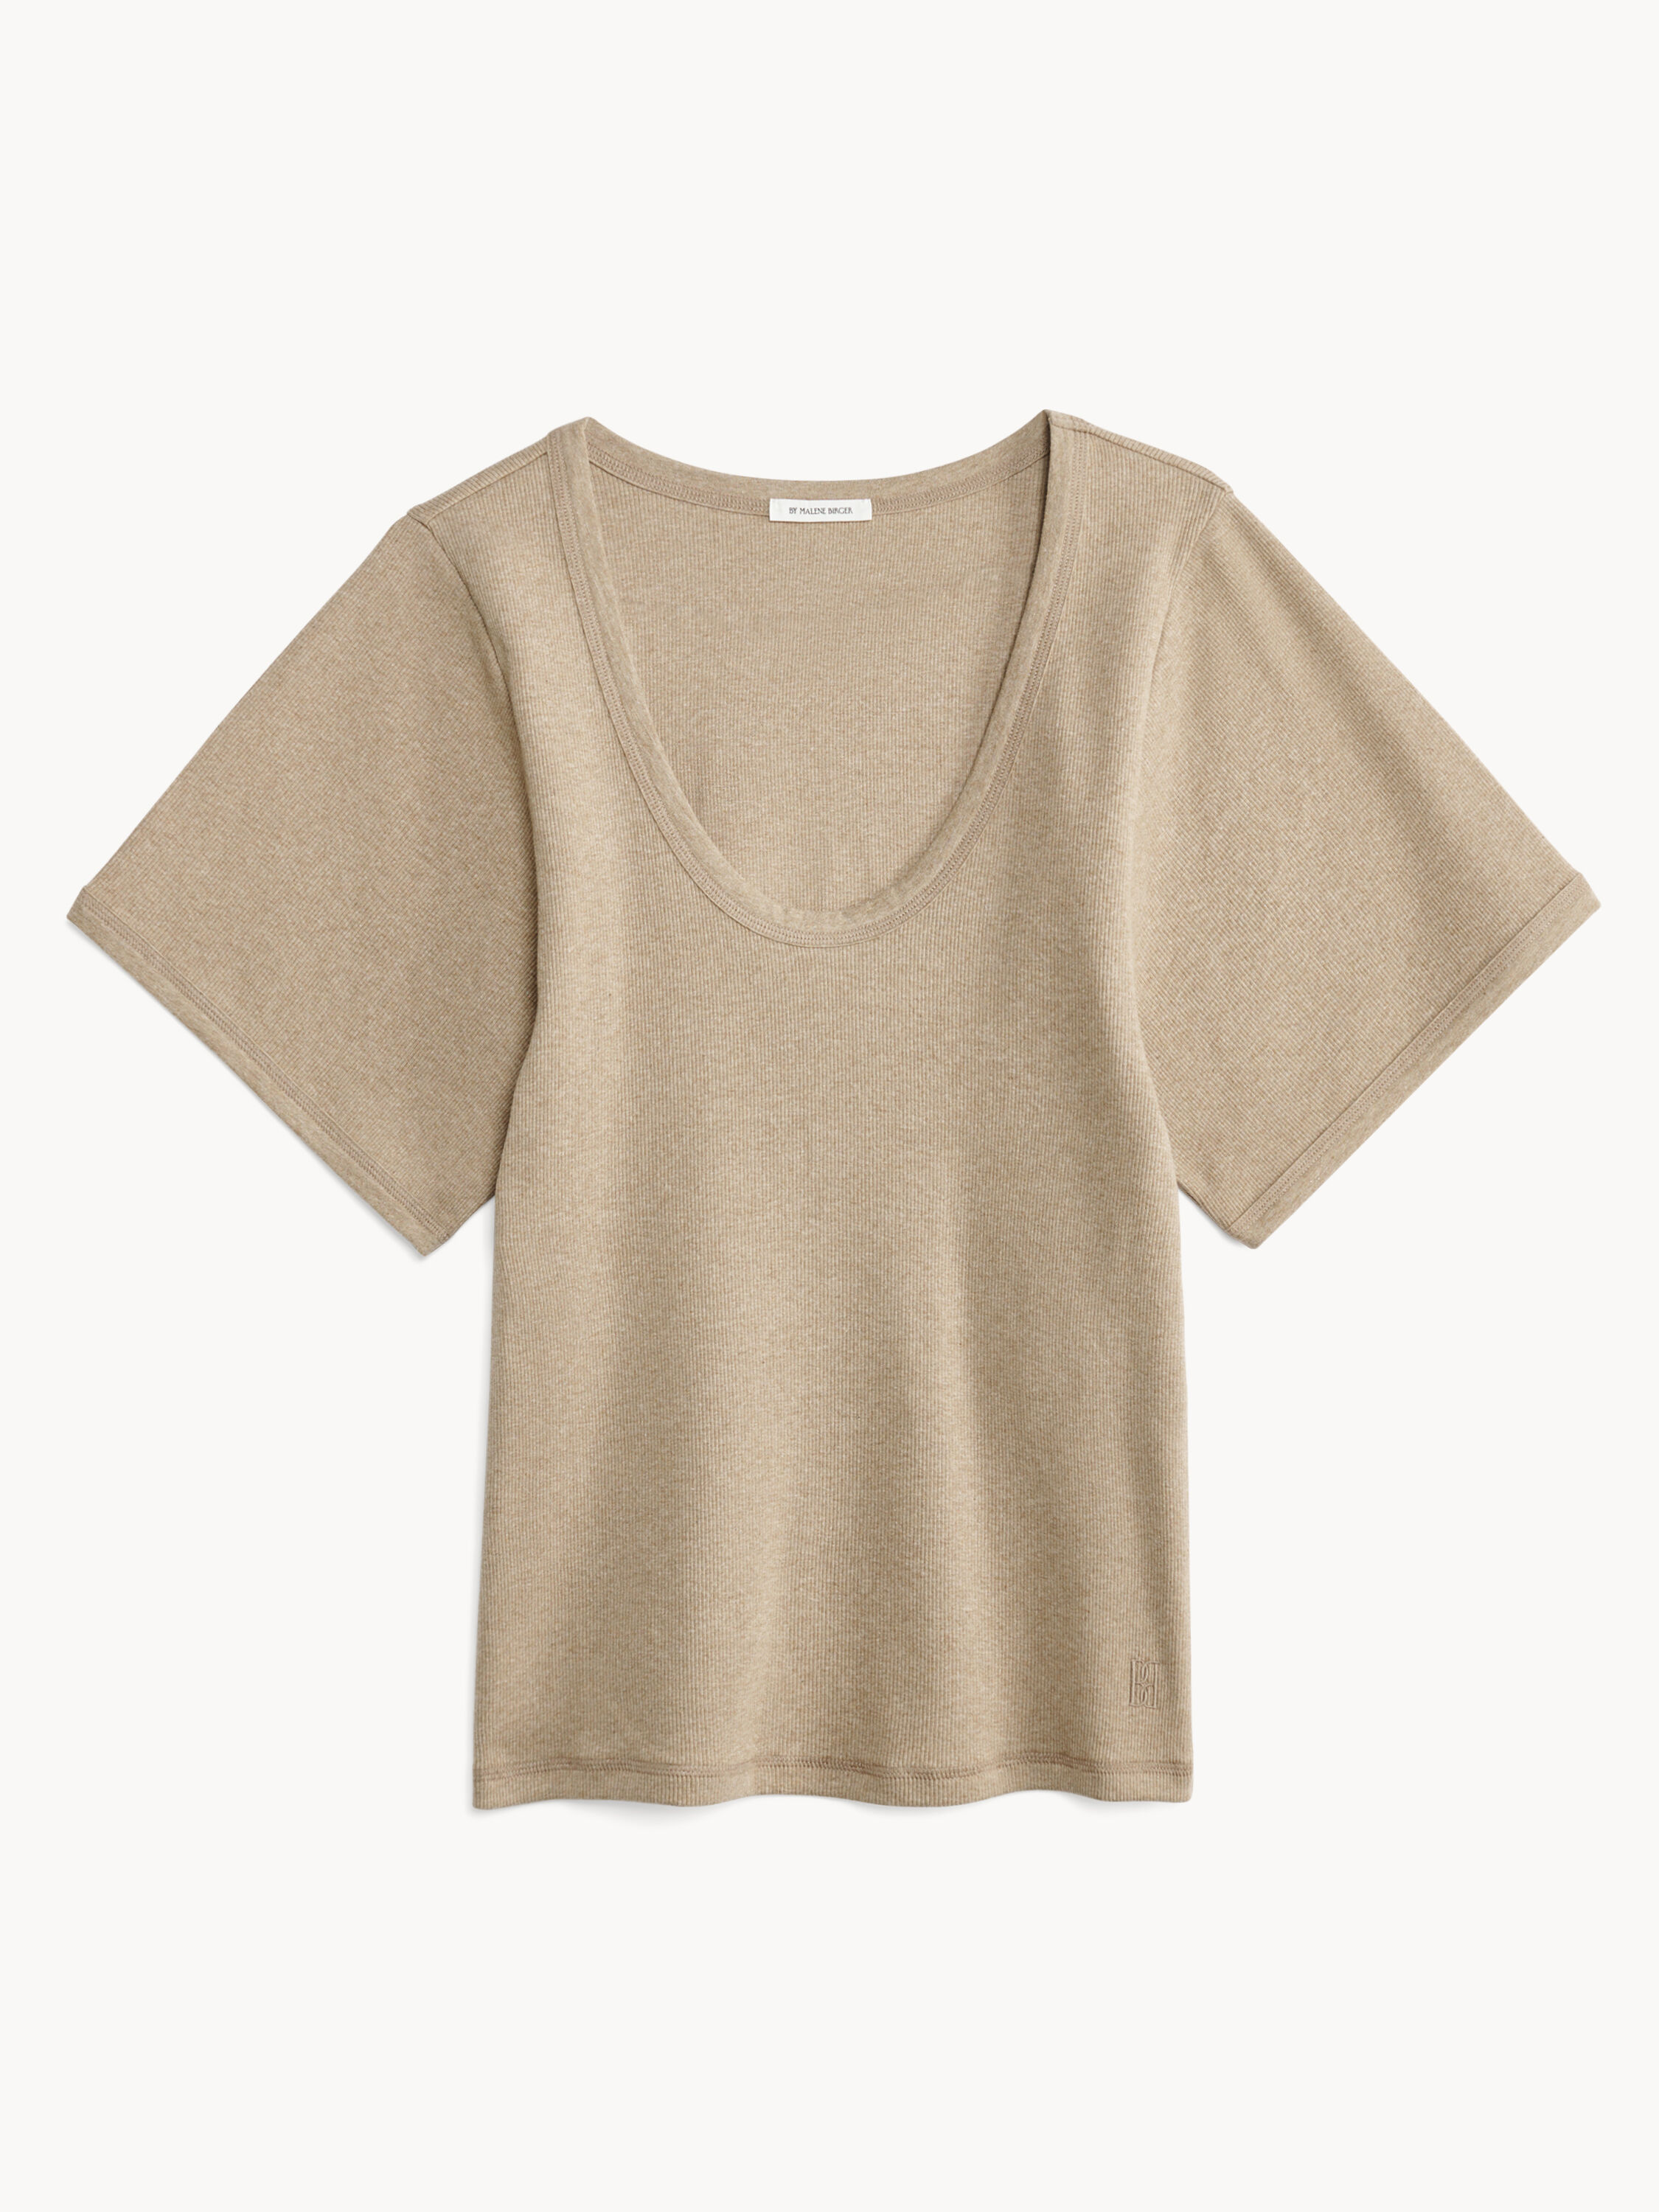 Tops | Explore all styles here | By Malene Birger